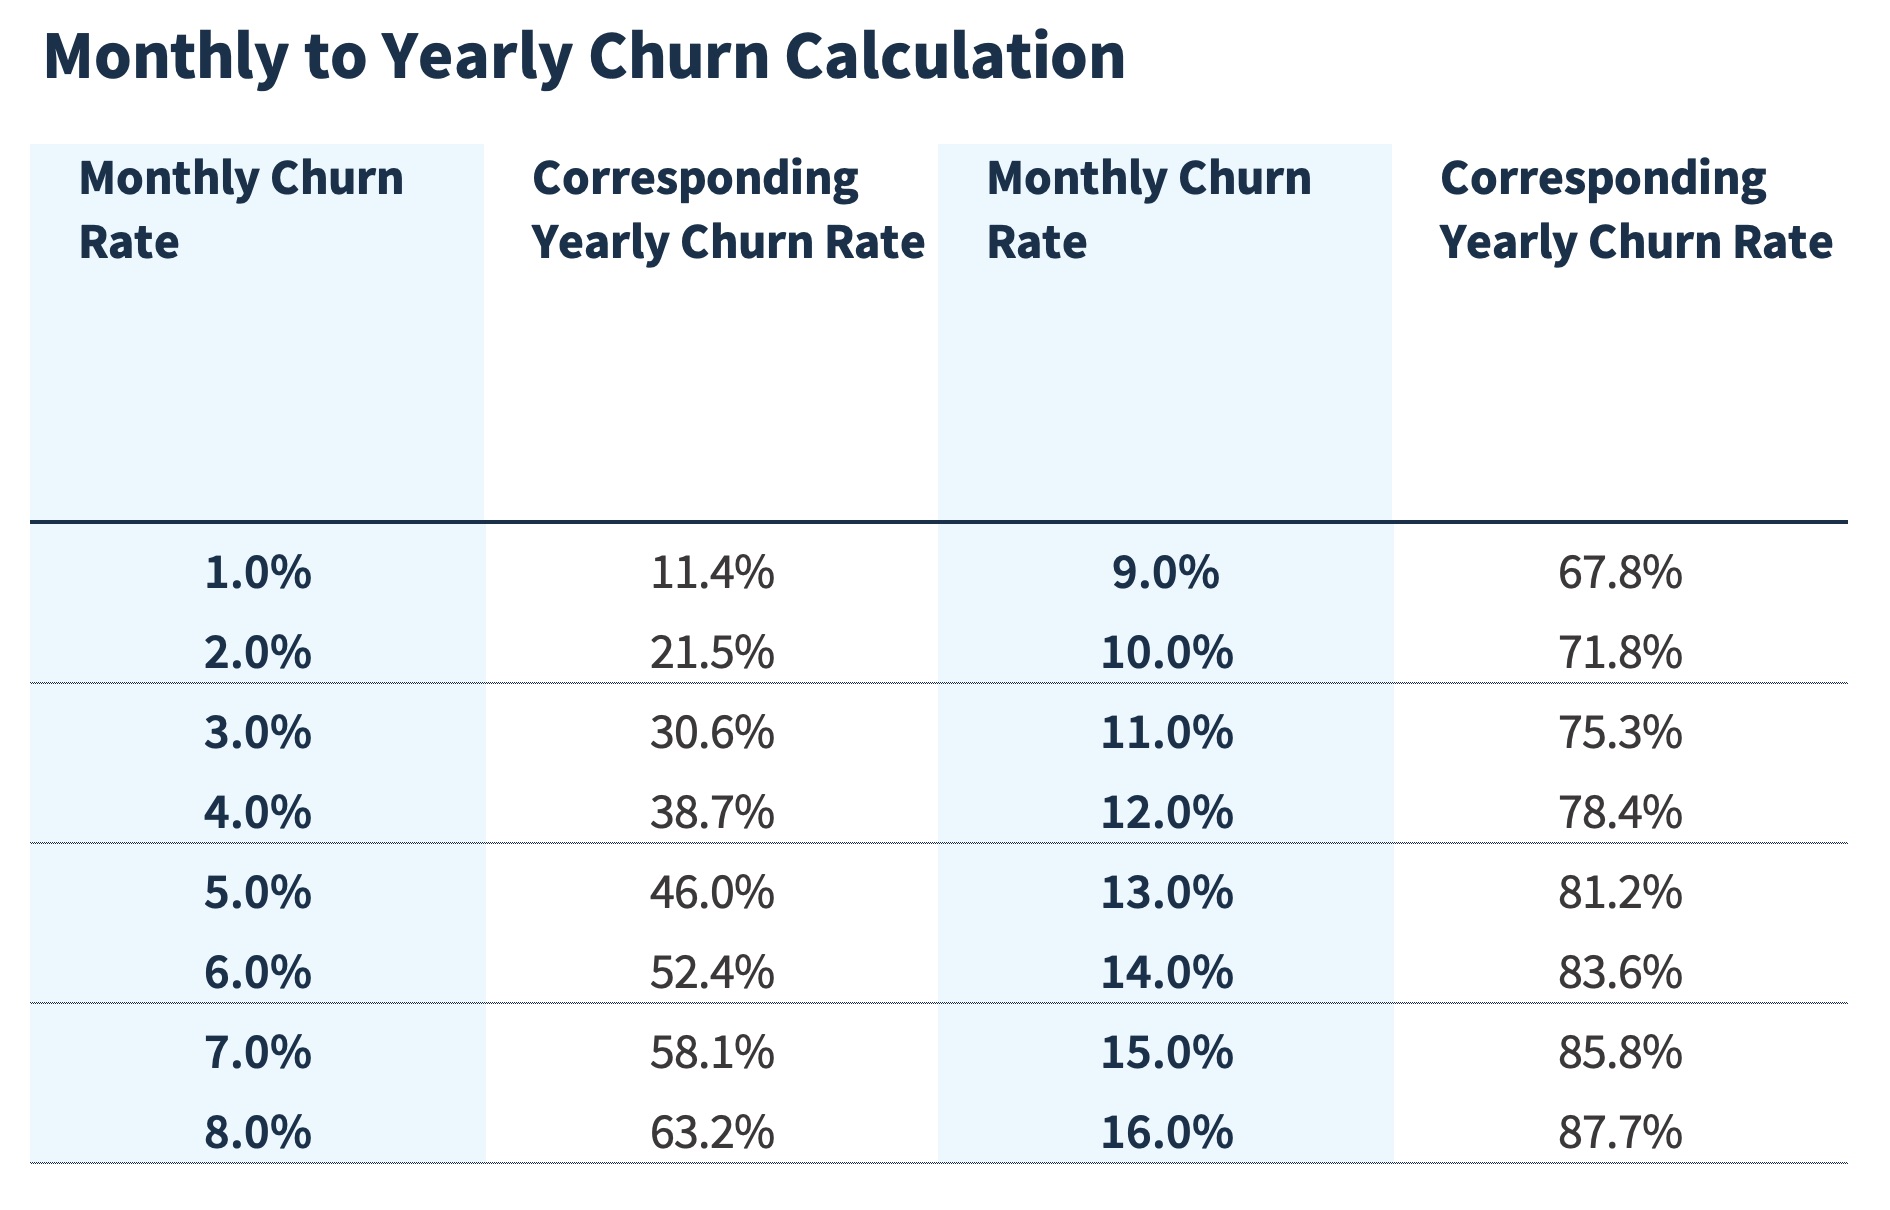 Table showing monthly to yearly churn calculations